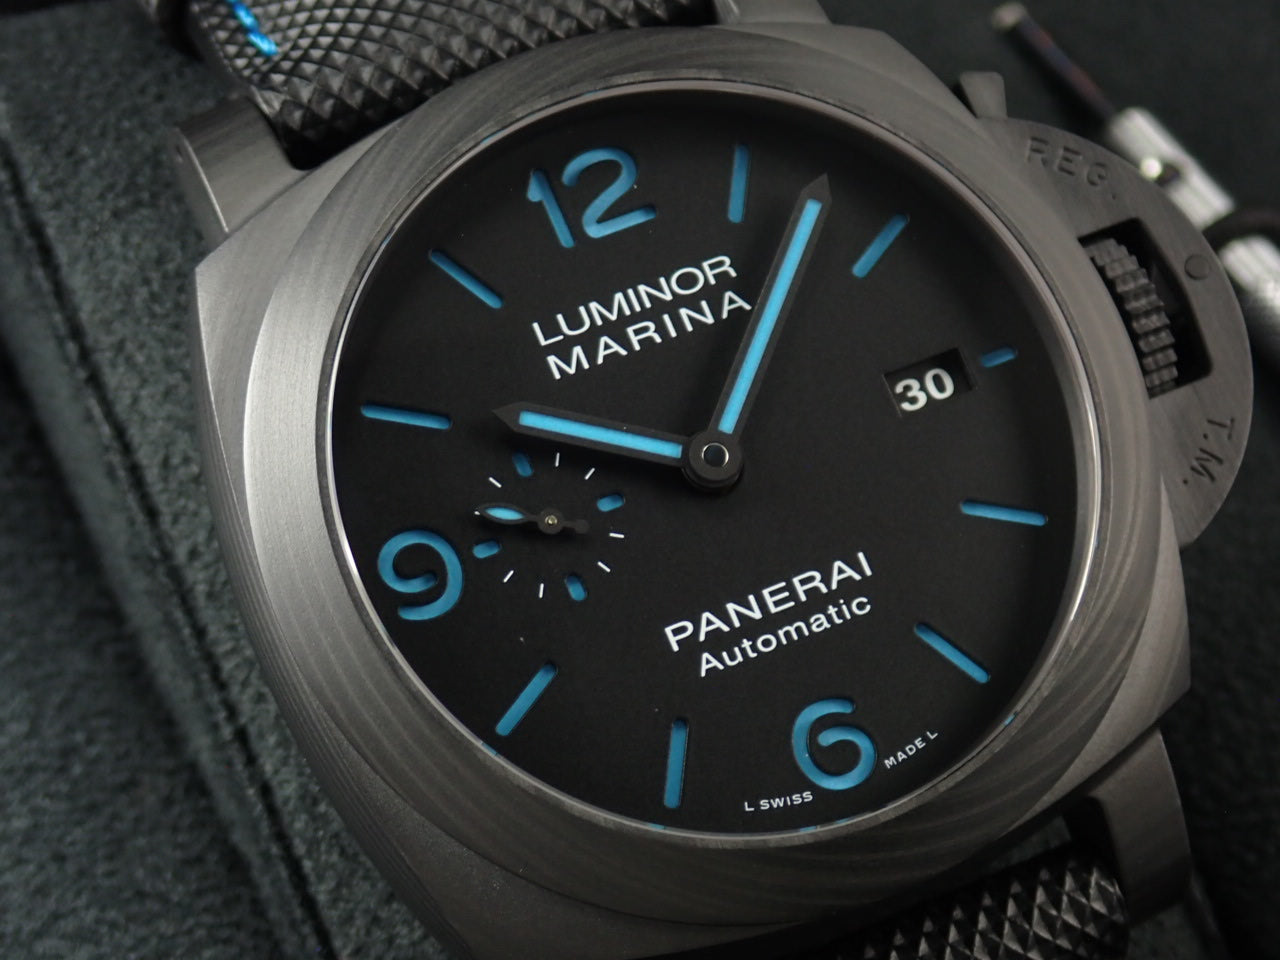 Panerai Luminor Marina Carbotech [Excellent condition] &lt;Warranty box and other details&gt;